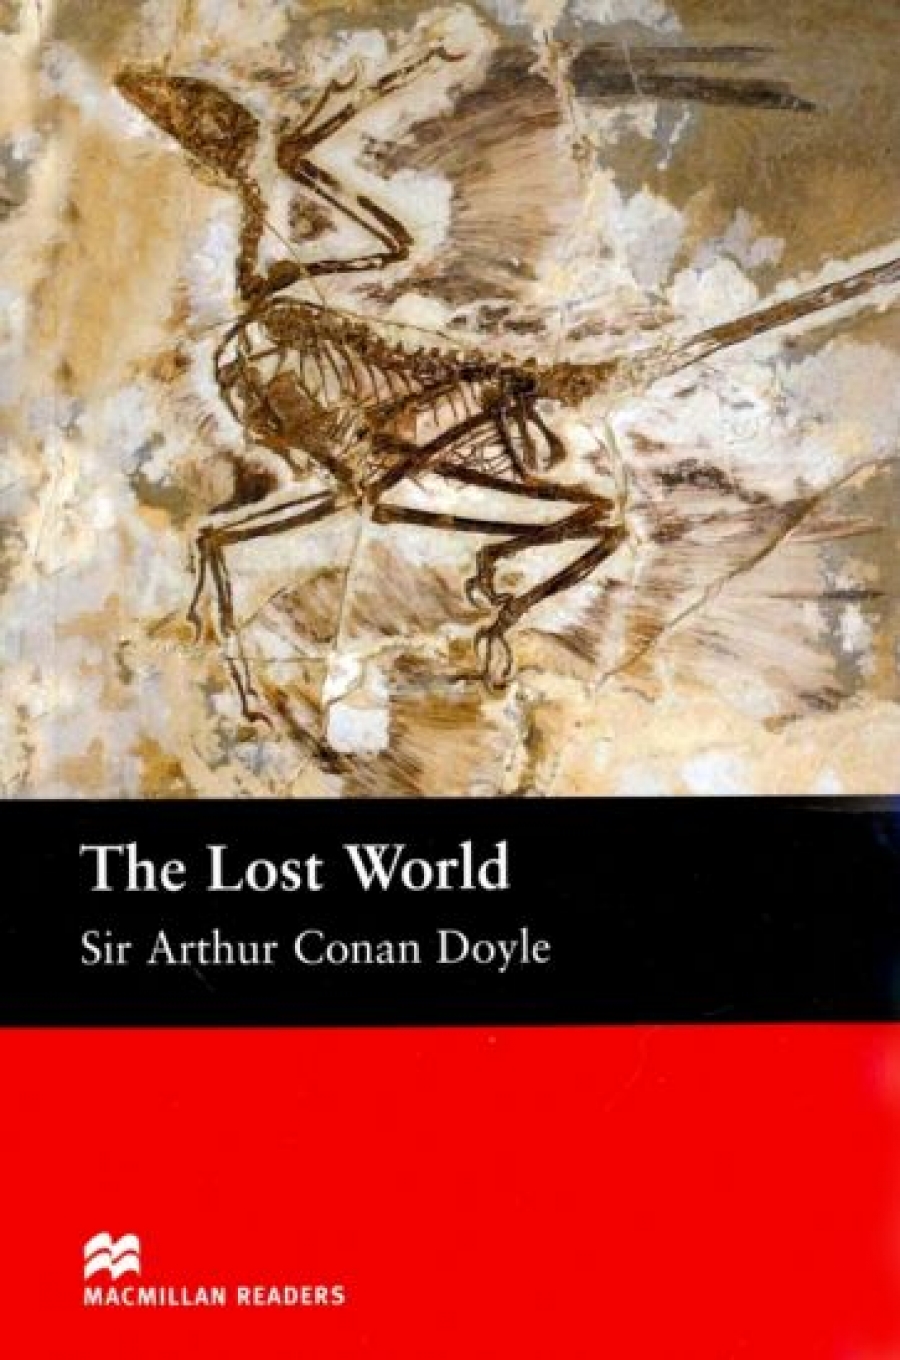 Sir Arthur Conan Doyle, retold by Anne Collins The Lost World 